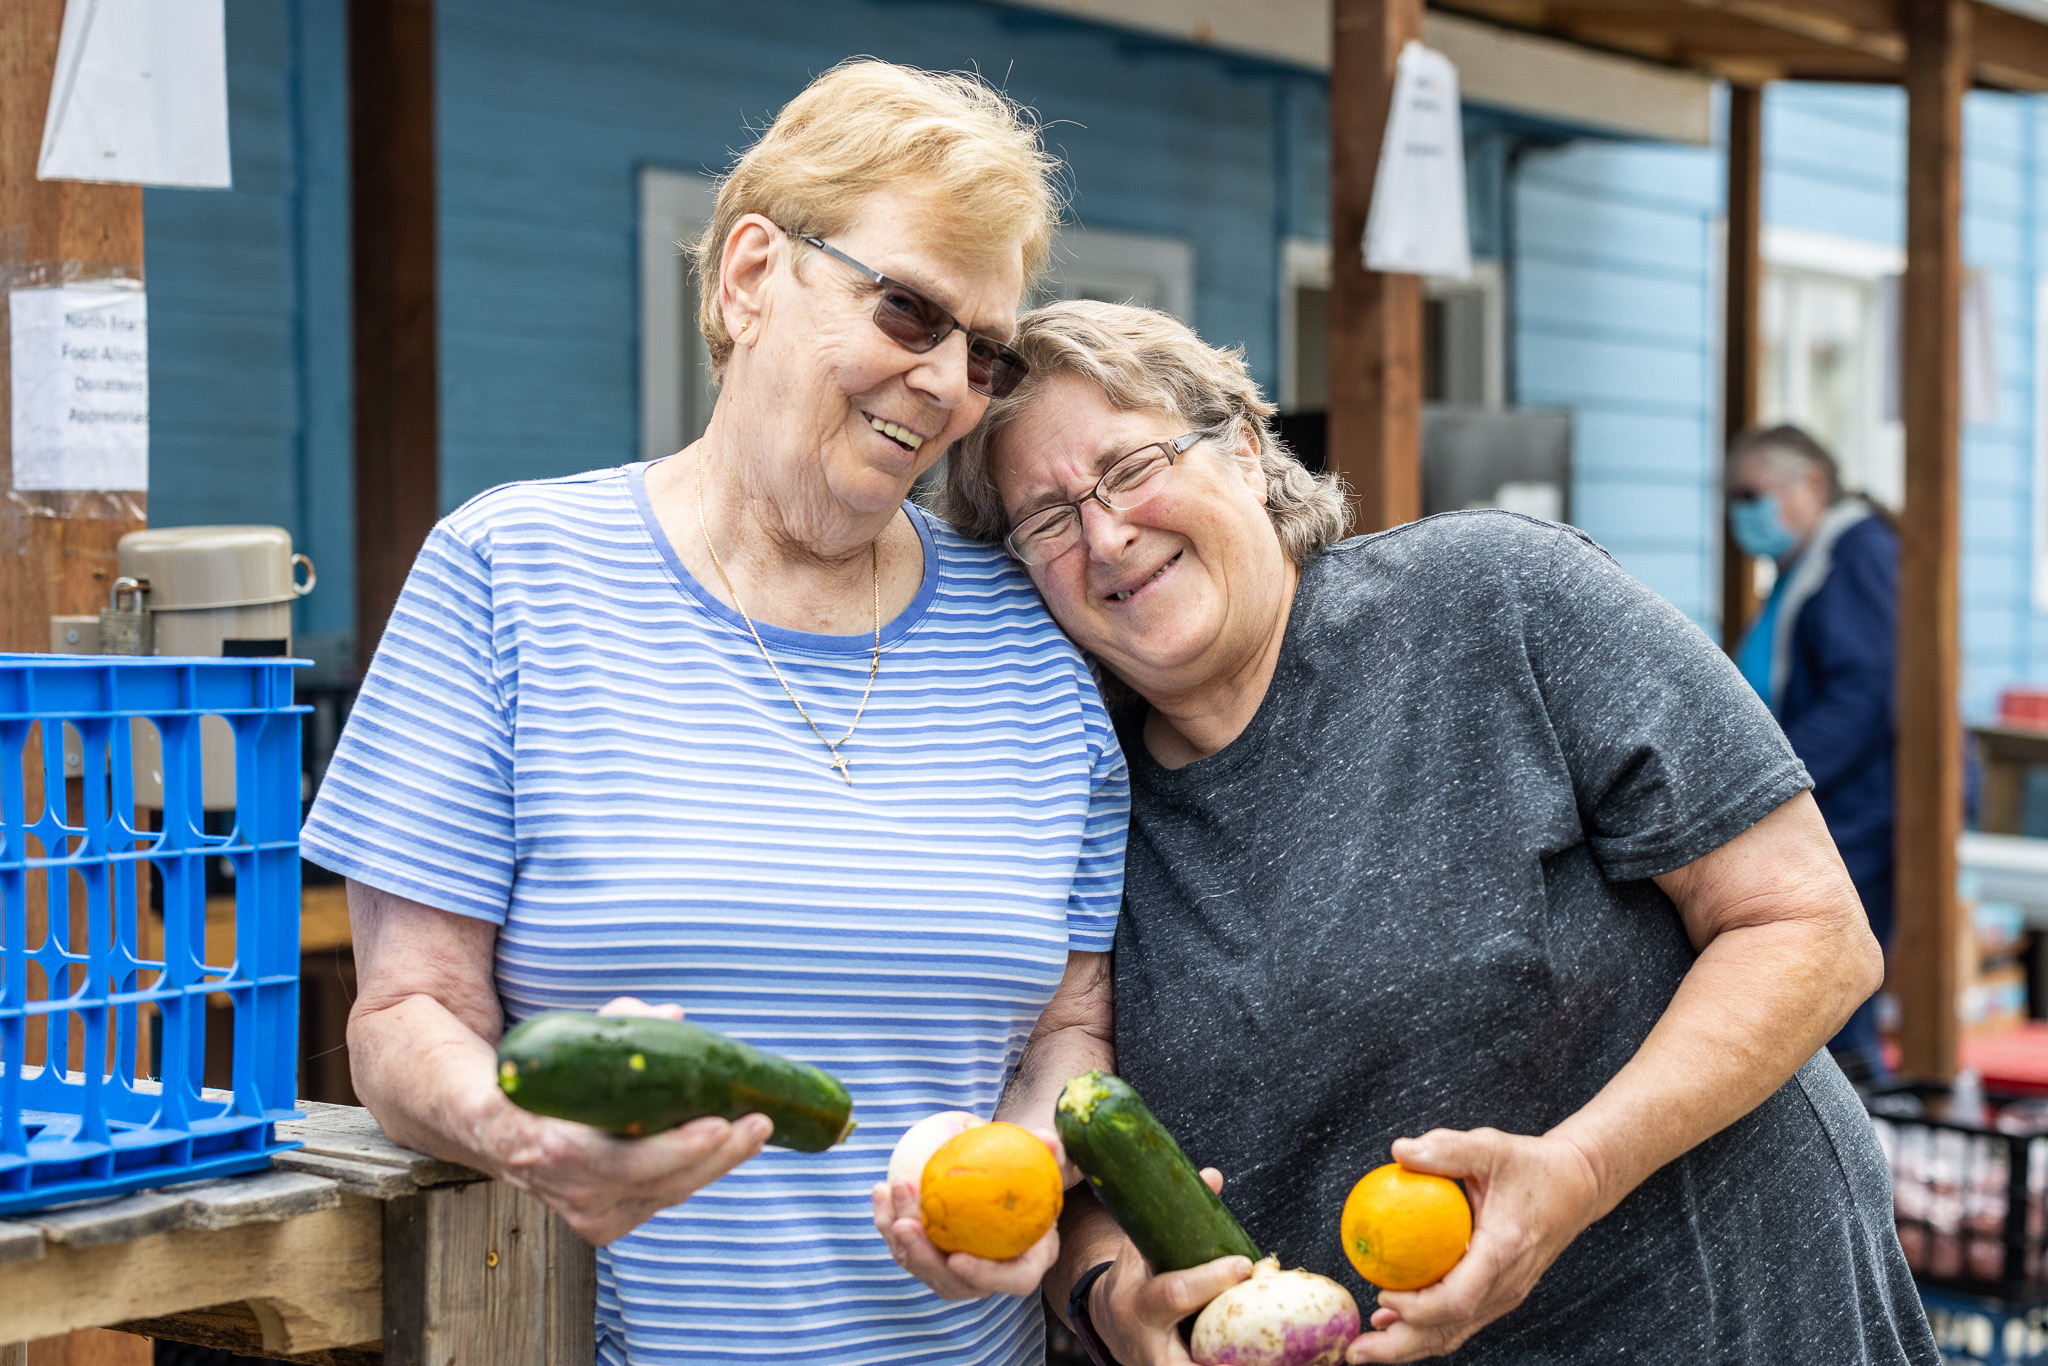 Ladies holding vegetables and laughing